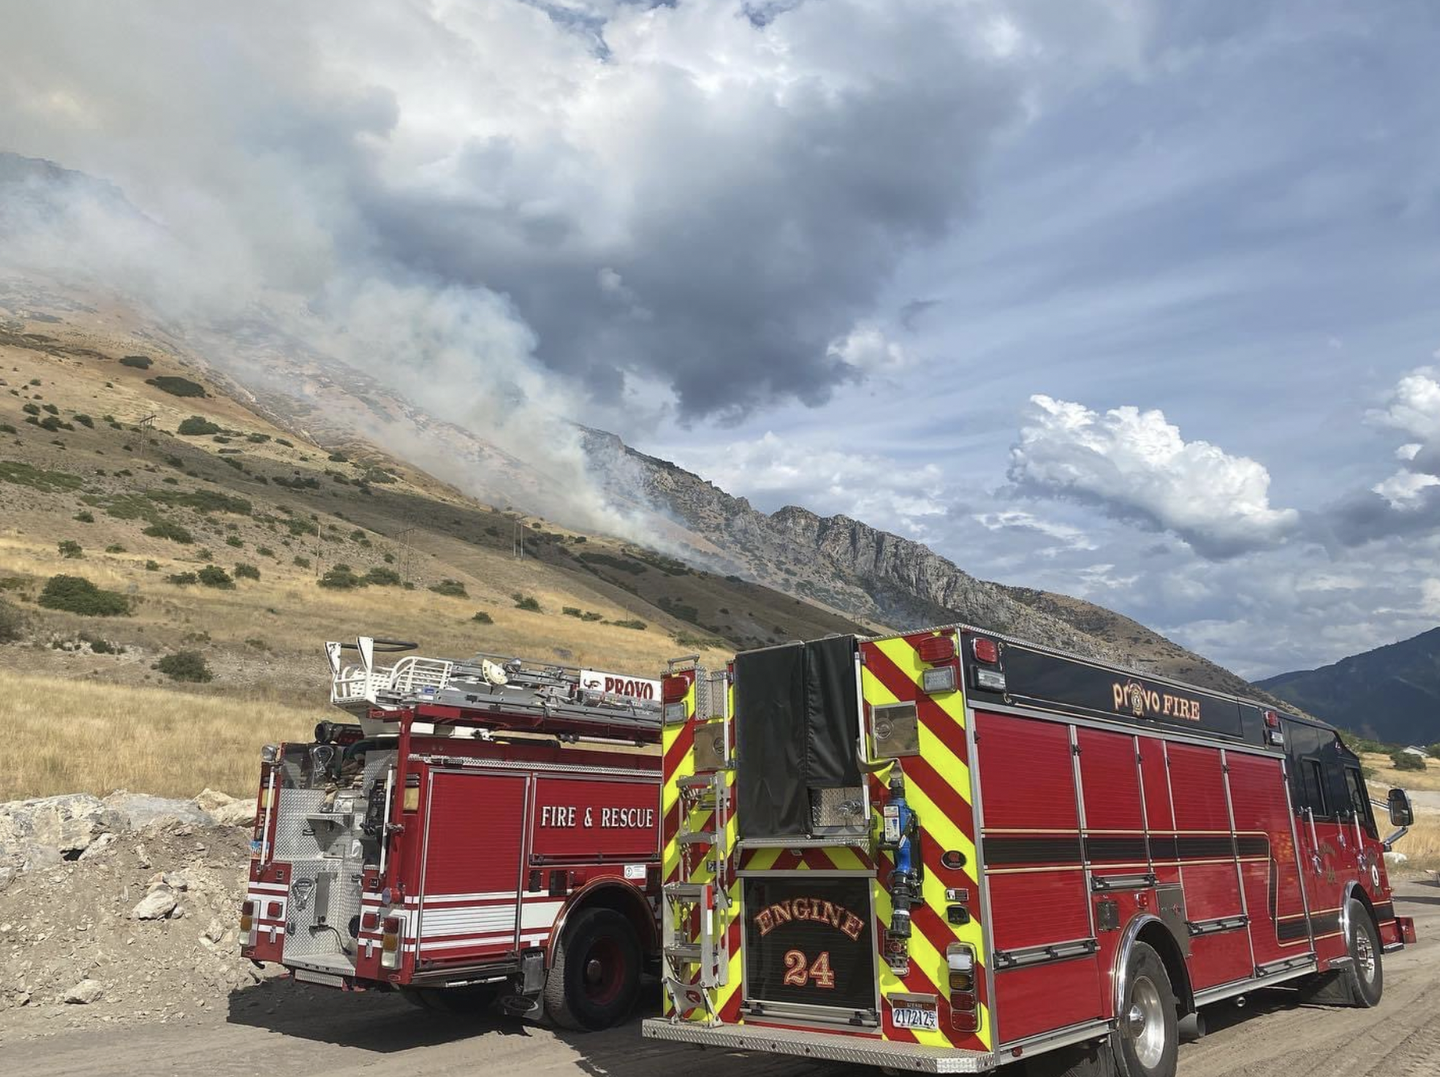 A man in Utah started a wildfire while attempting to kill a spider